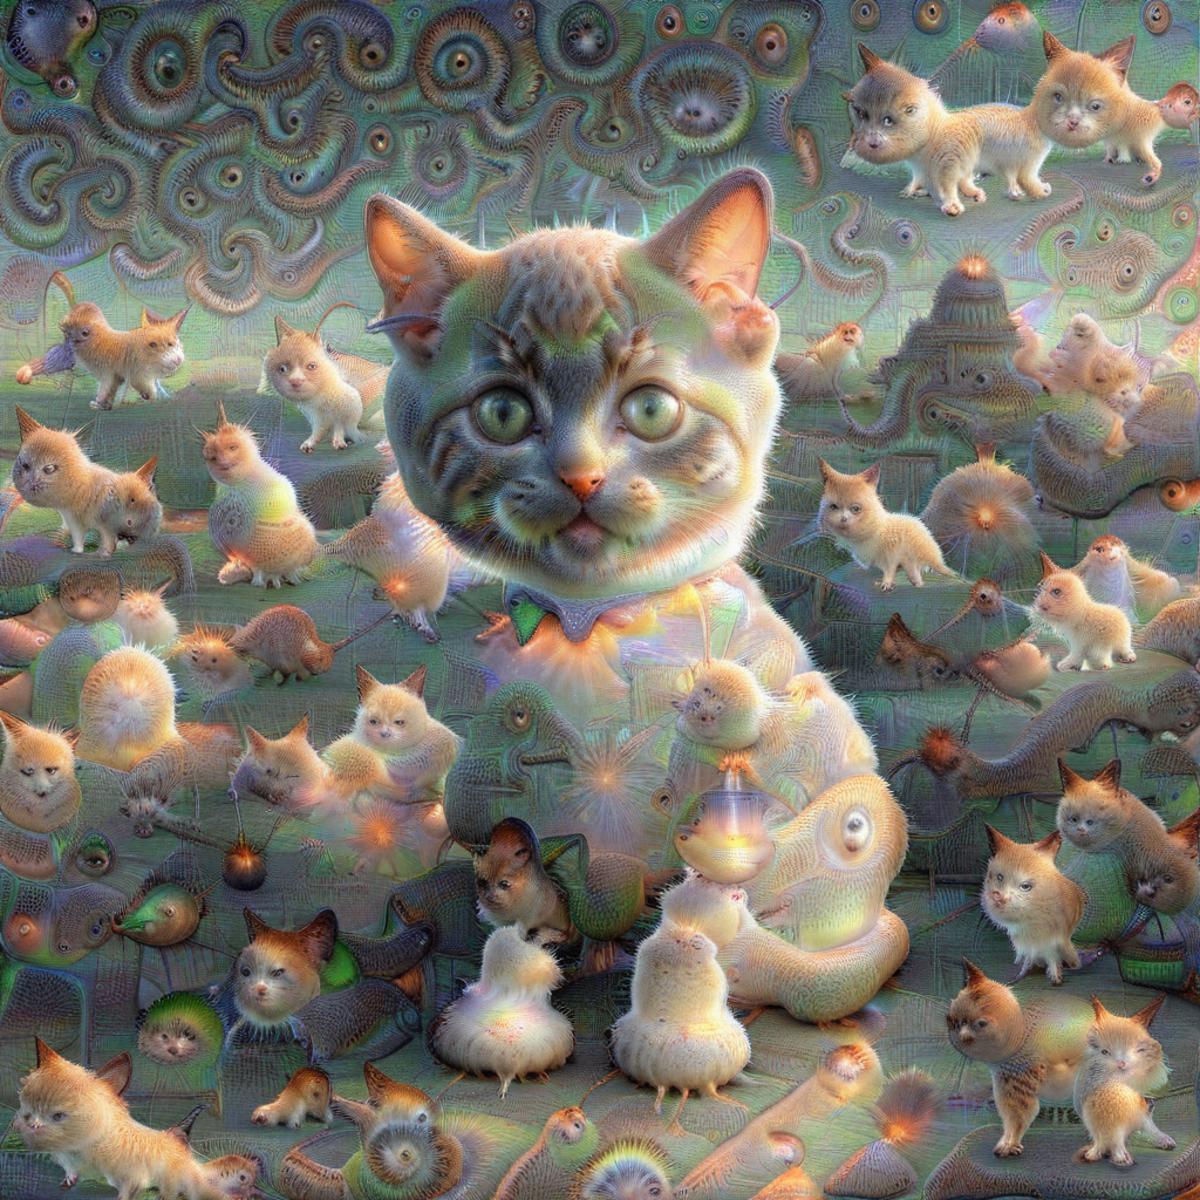 DeepDream2 image by The_one_and_only7723